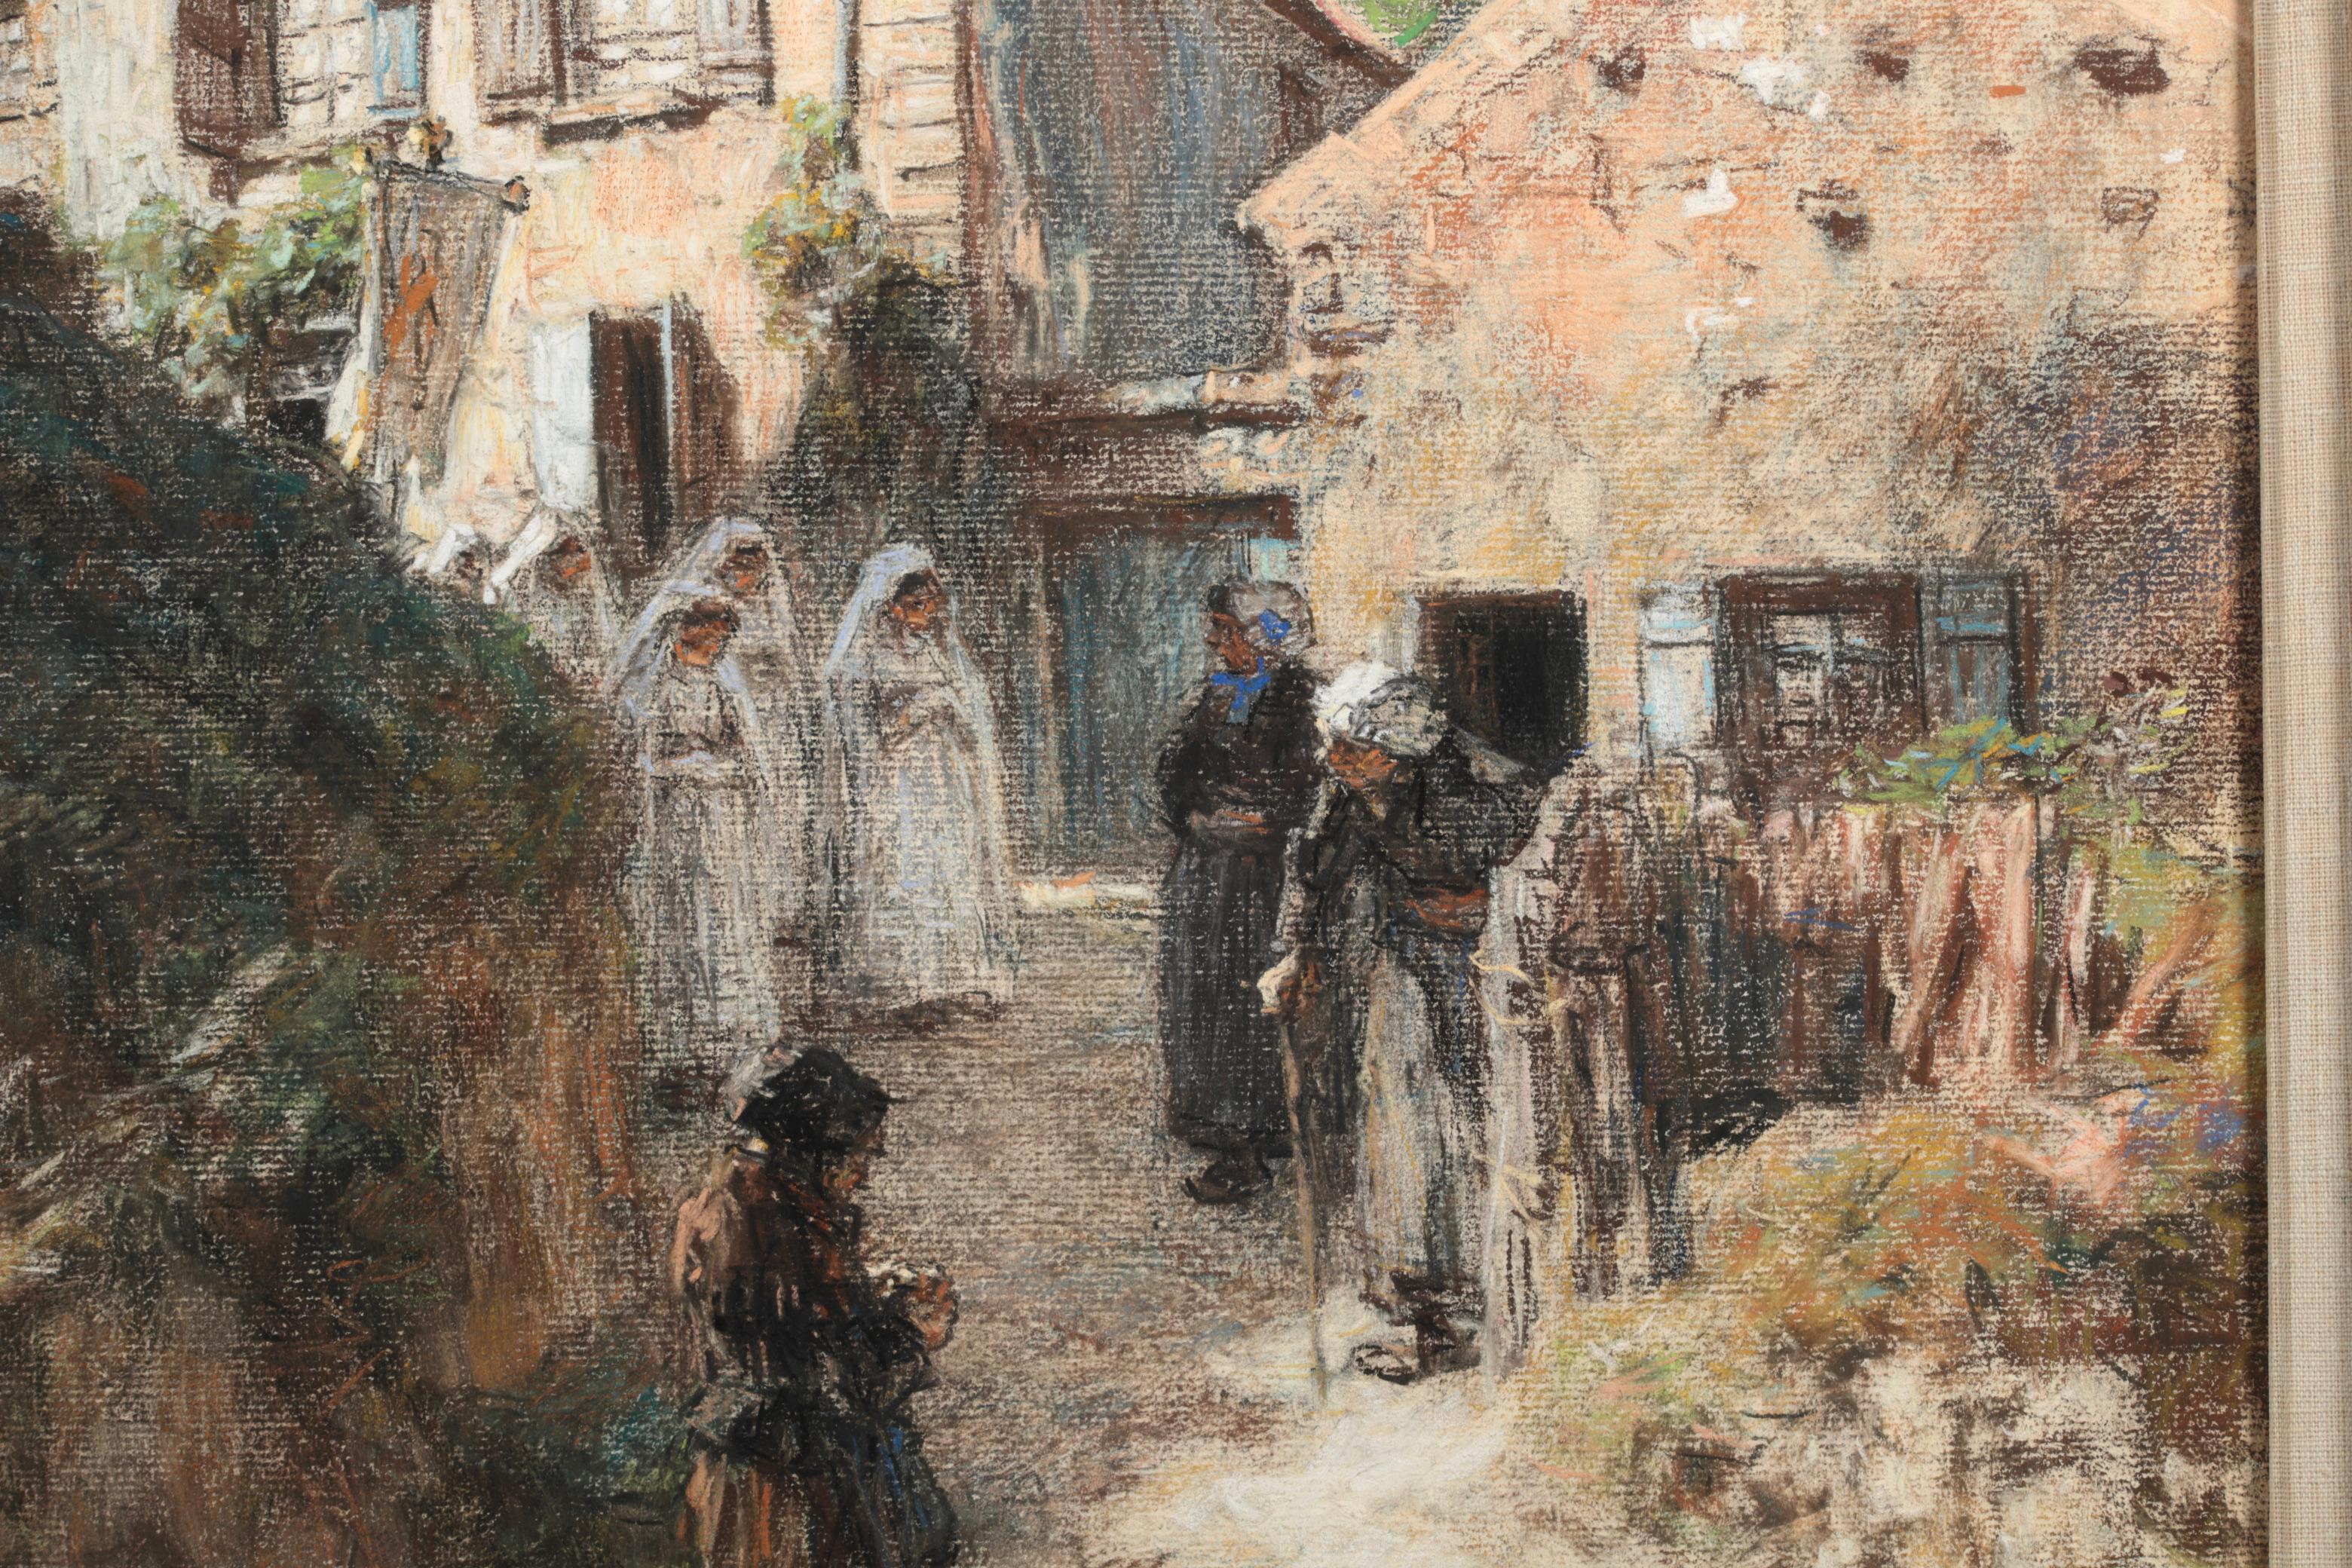 Signed Barbizon figures in landscape pastel on paper circa 1885 by French painter Leon Augustin Lhermitte. The piece depicts a first communion ceremony, with girls in white dresses and headscarves walking through a village as elder women look on. A